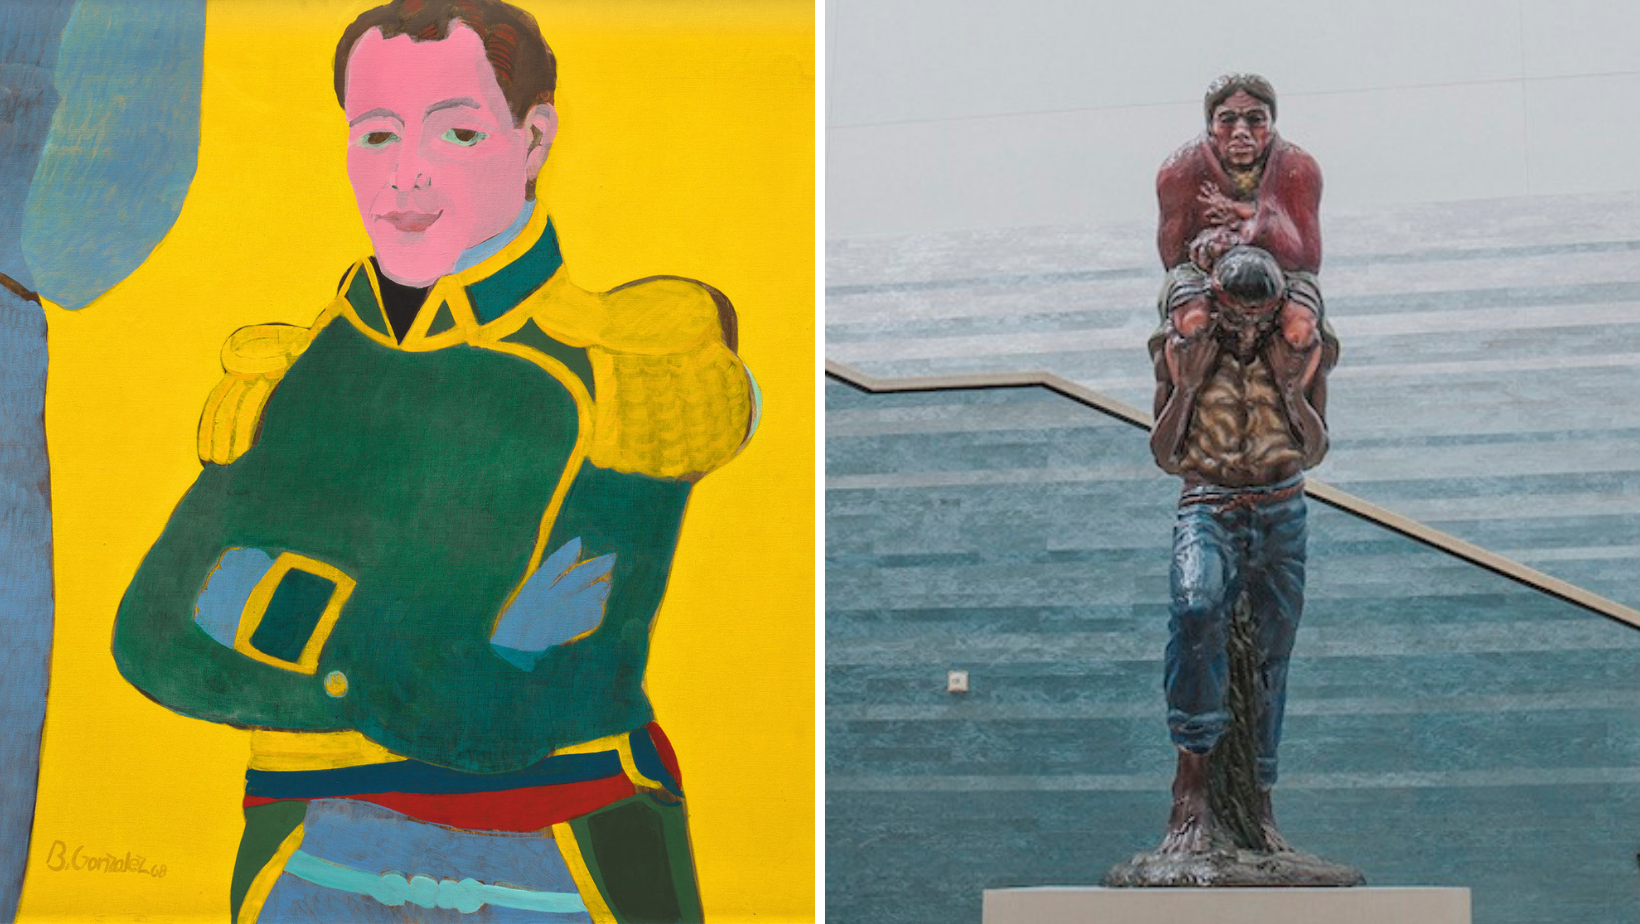 A grid of two artworks. The first is a soldier wearing military clothes, standing in front of a bright yellow background. The second is a sculpture of a man carrying a woman and child on his shoulders.